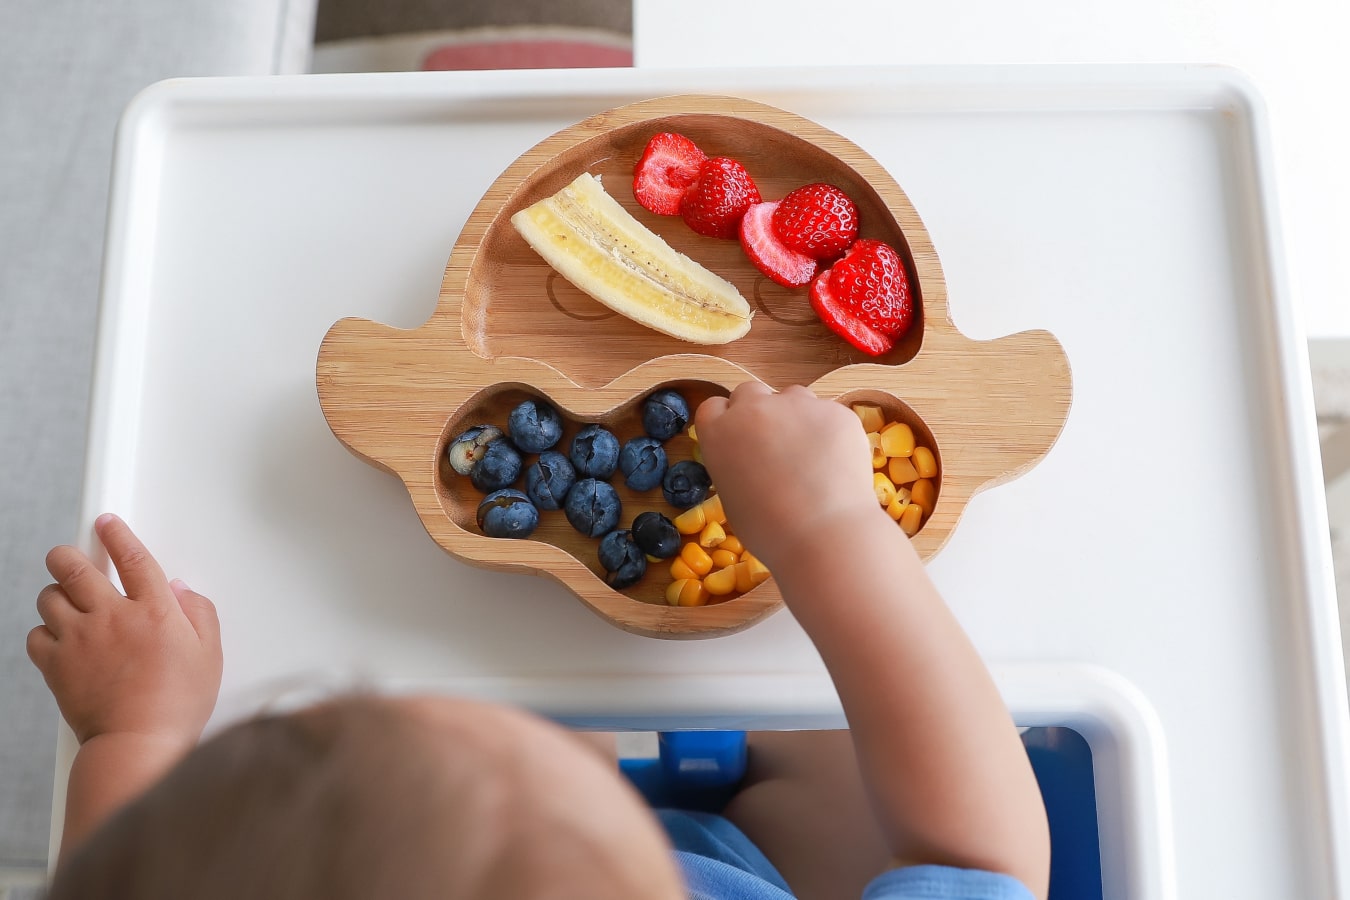 On a wooden plate with compartments colourful fruit and vegetables: banana, blueberries, corn, and strawberries can be seen. The child reaches for the food.